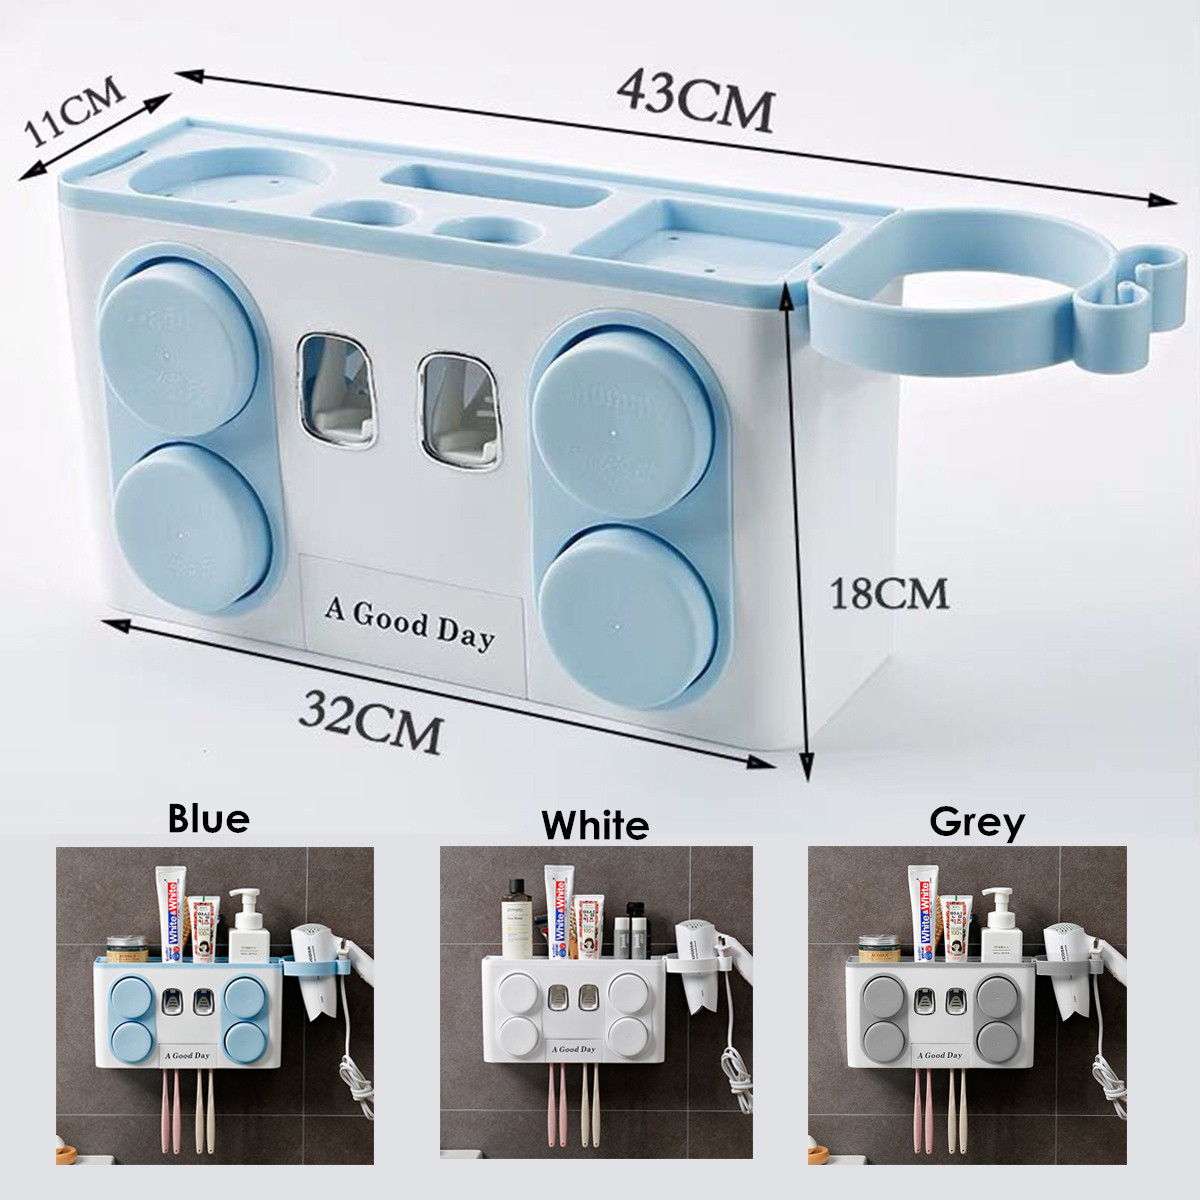 Multifunctional-Automatic-Toothpaste-Squeezer-Set-Wall-Mount-Suction-Cup-Toothbrush-Holder-Bathroom--1555695-10